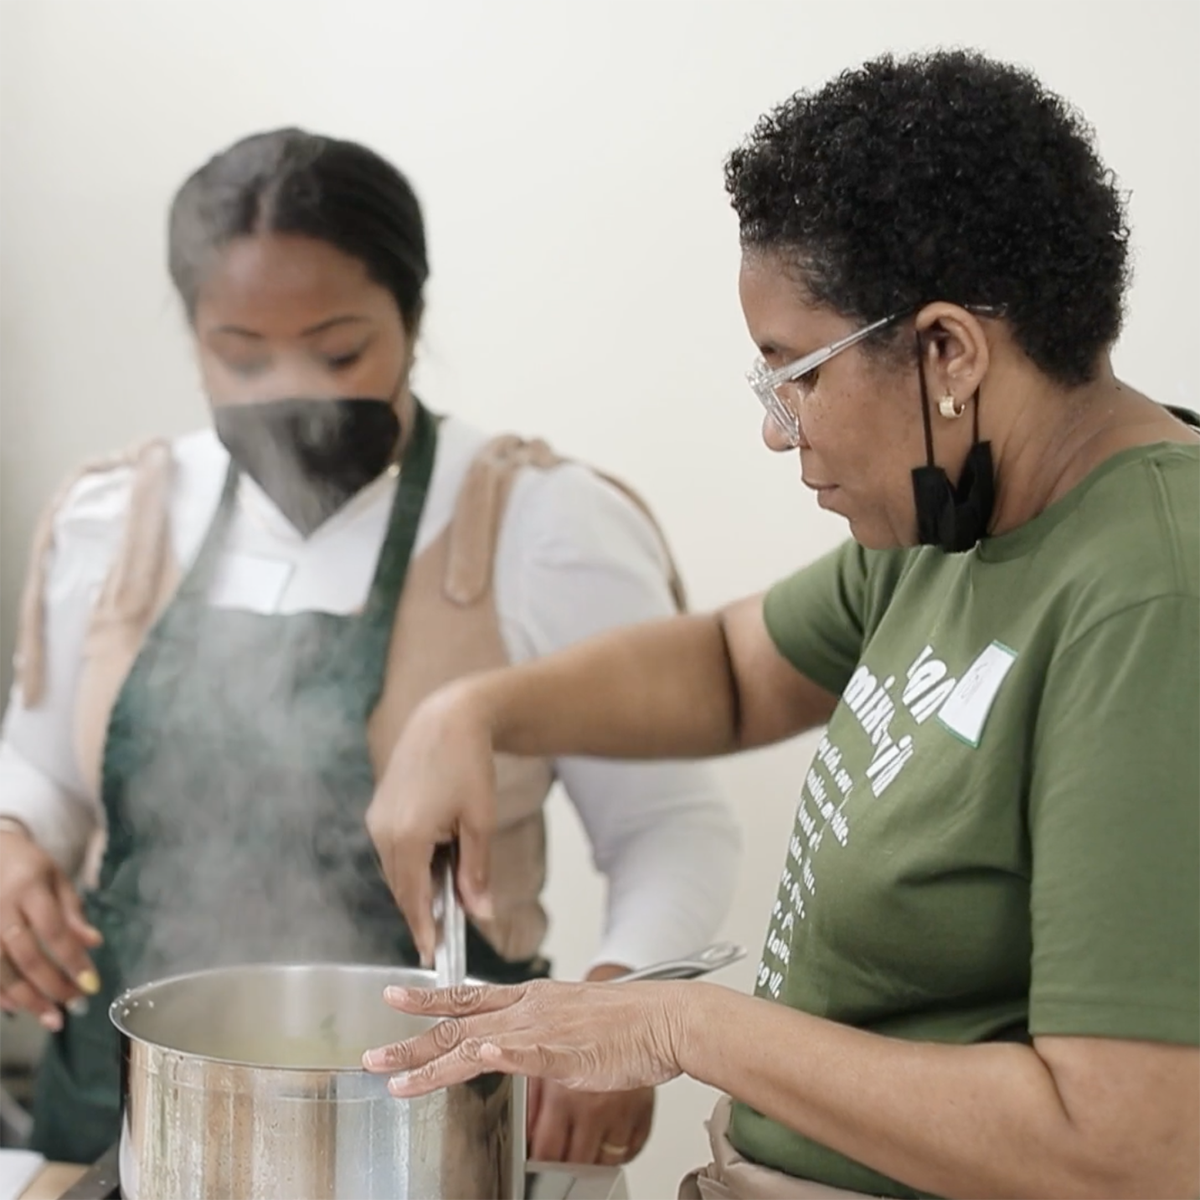 Photo of a Black woman, Toni Simpson, stirring food in a pot and demonstrating to a younger Black woman in an apron and mask who is observing